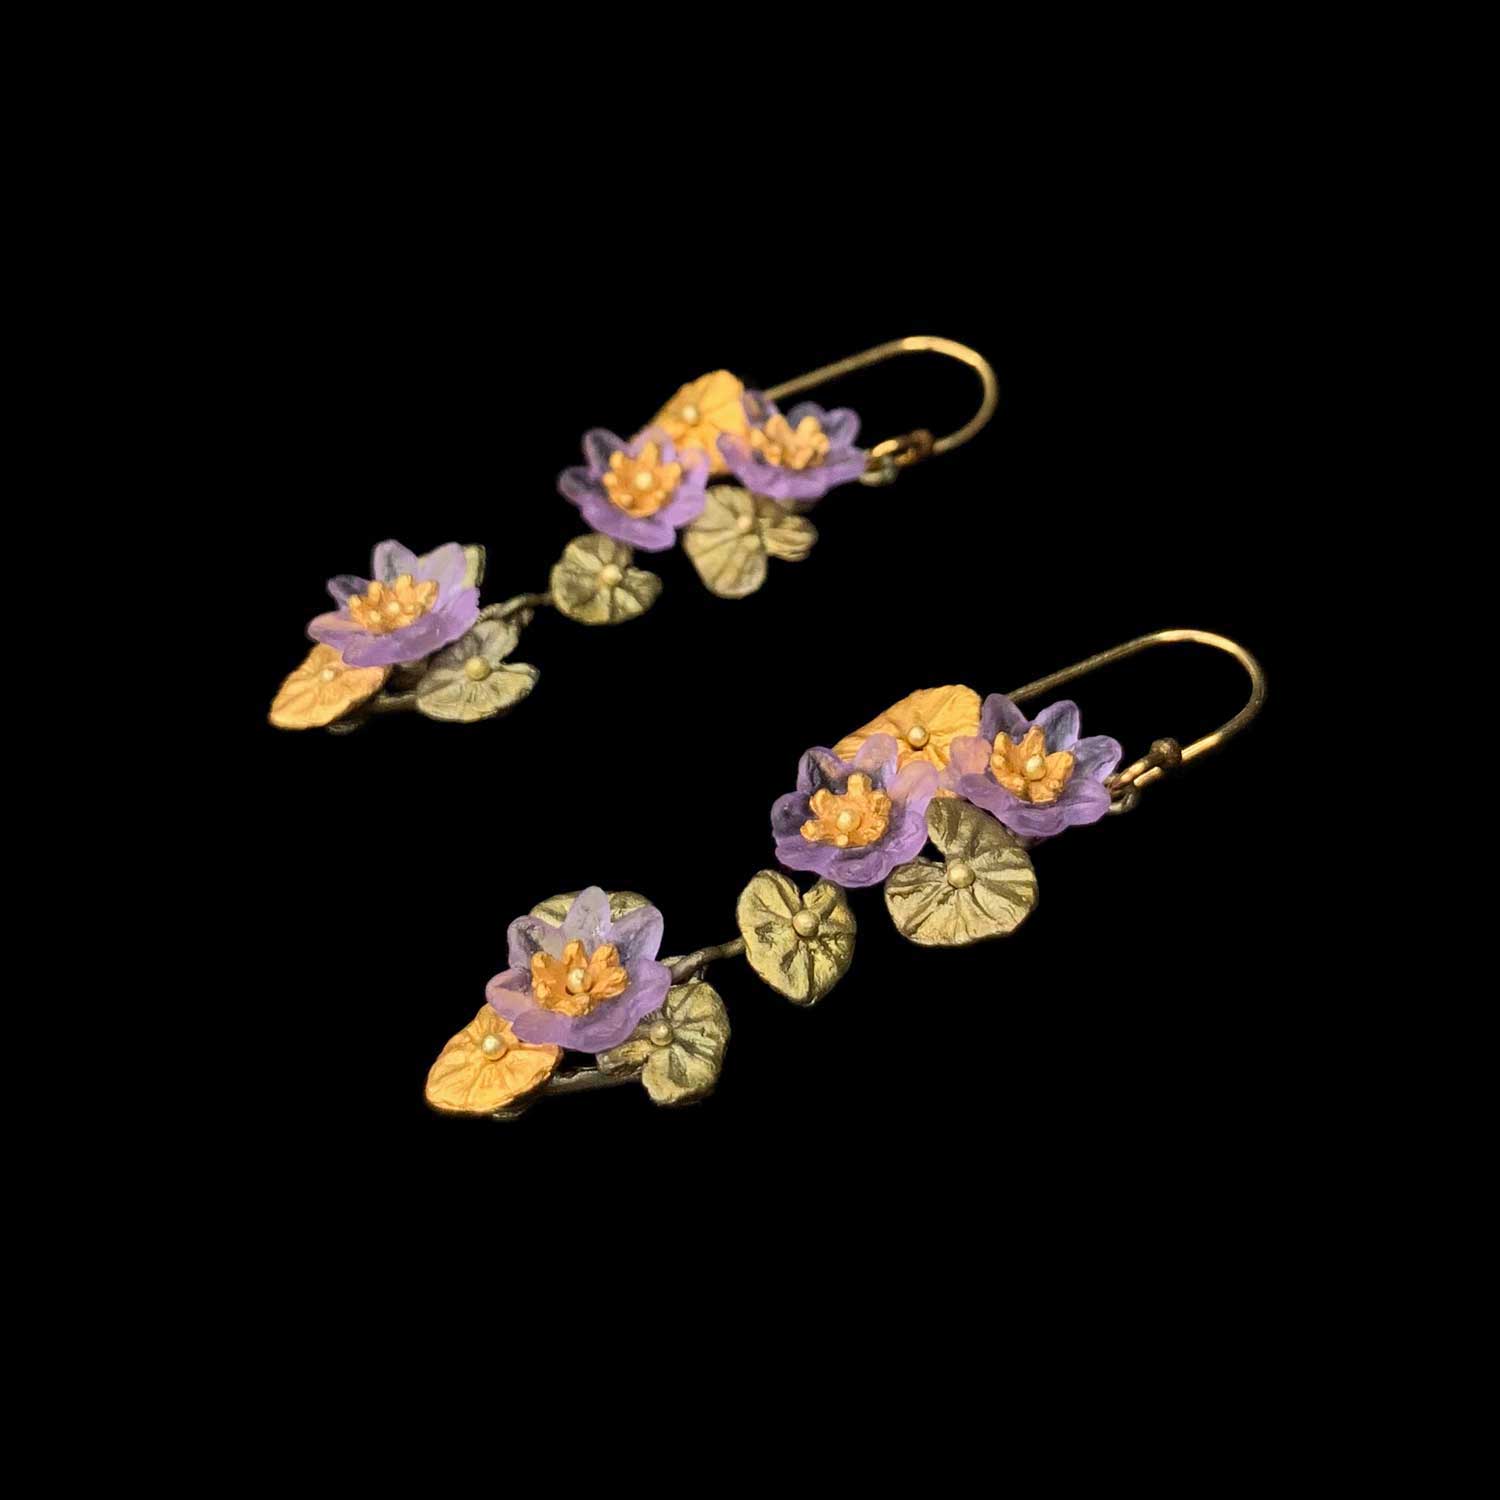 Giverny Water Lilies Earrings - Long Dangle Wire